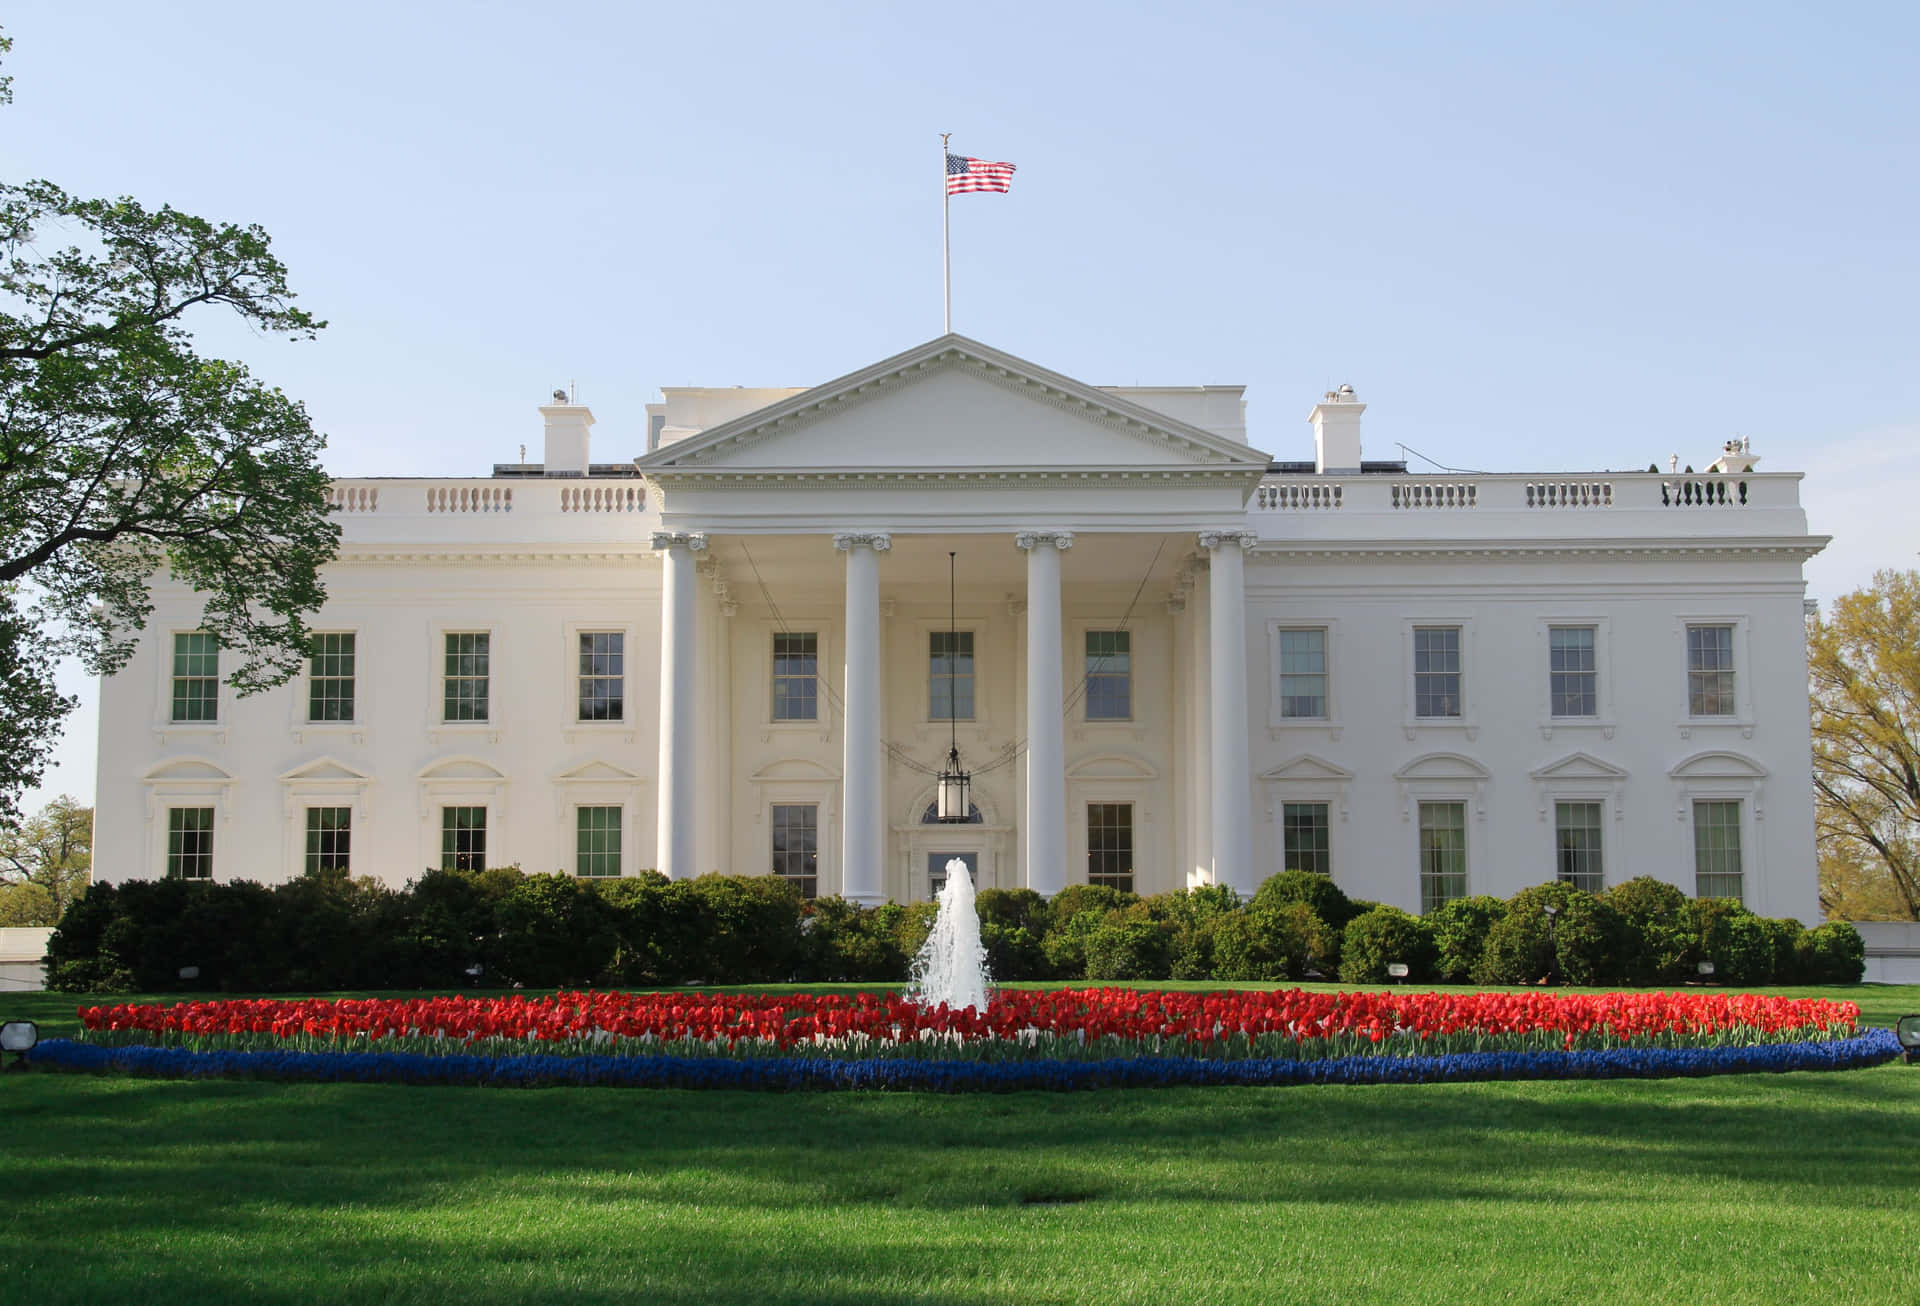 View of the White House in Washington D.C., USA